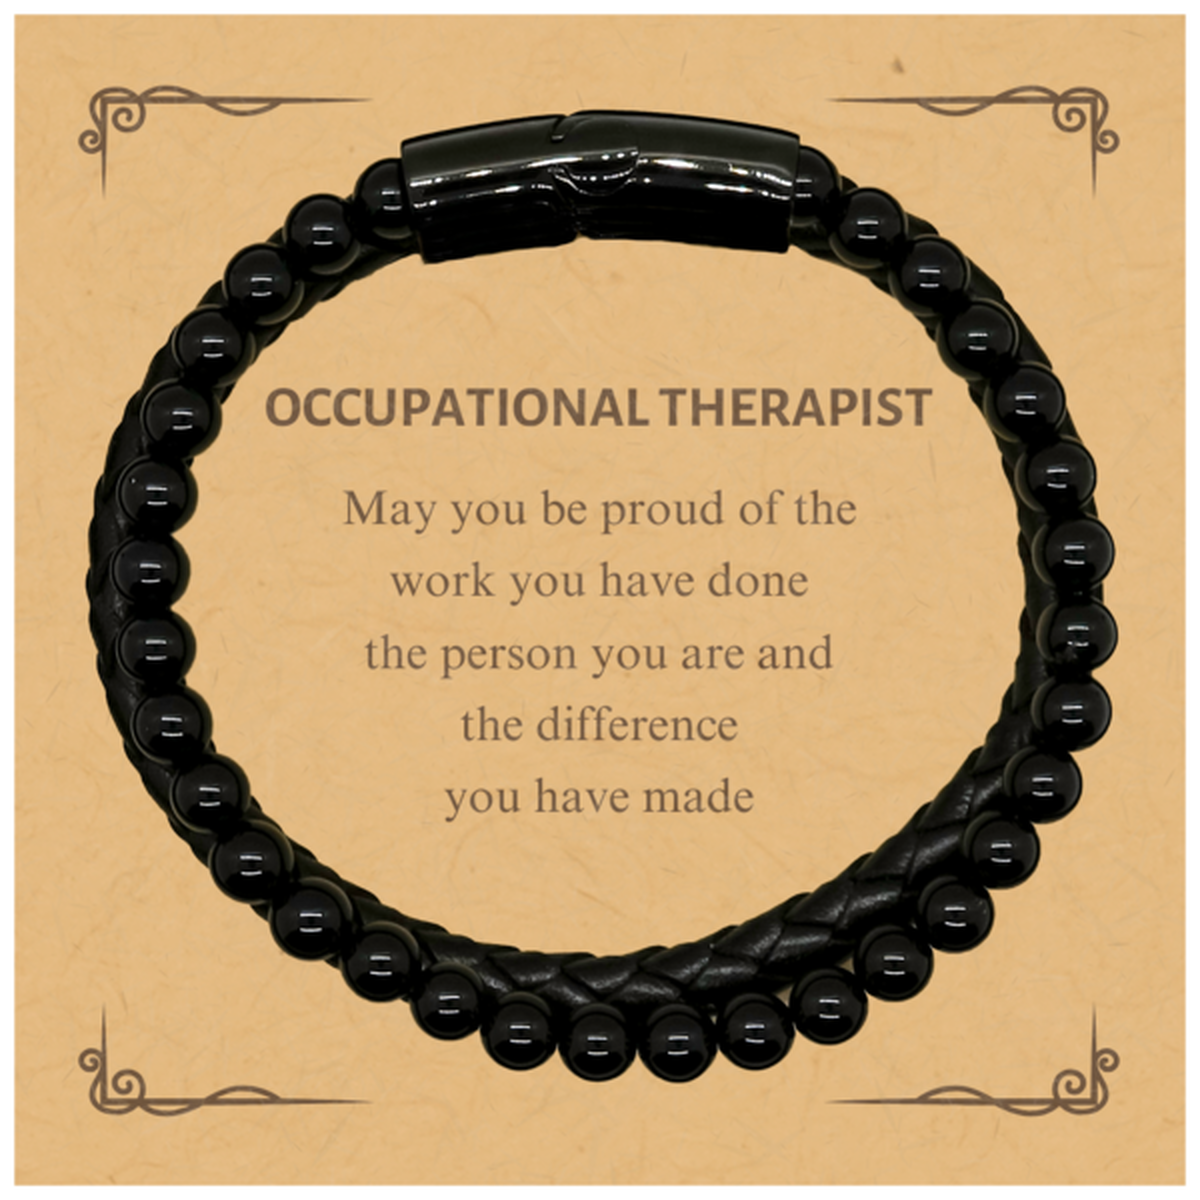 Occupational Therapist May you be proud of the work you have done, Retirement Occupational Therapist Stone Leather Bracelets for Colleague Appreciation Gifts Amazing for Occupational Therapist